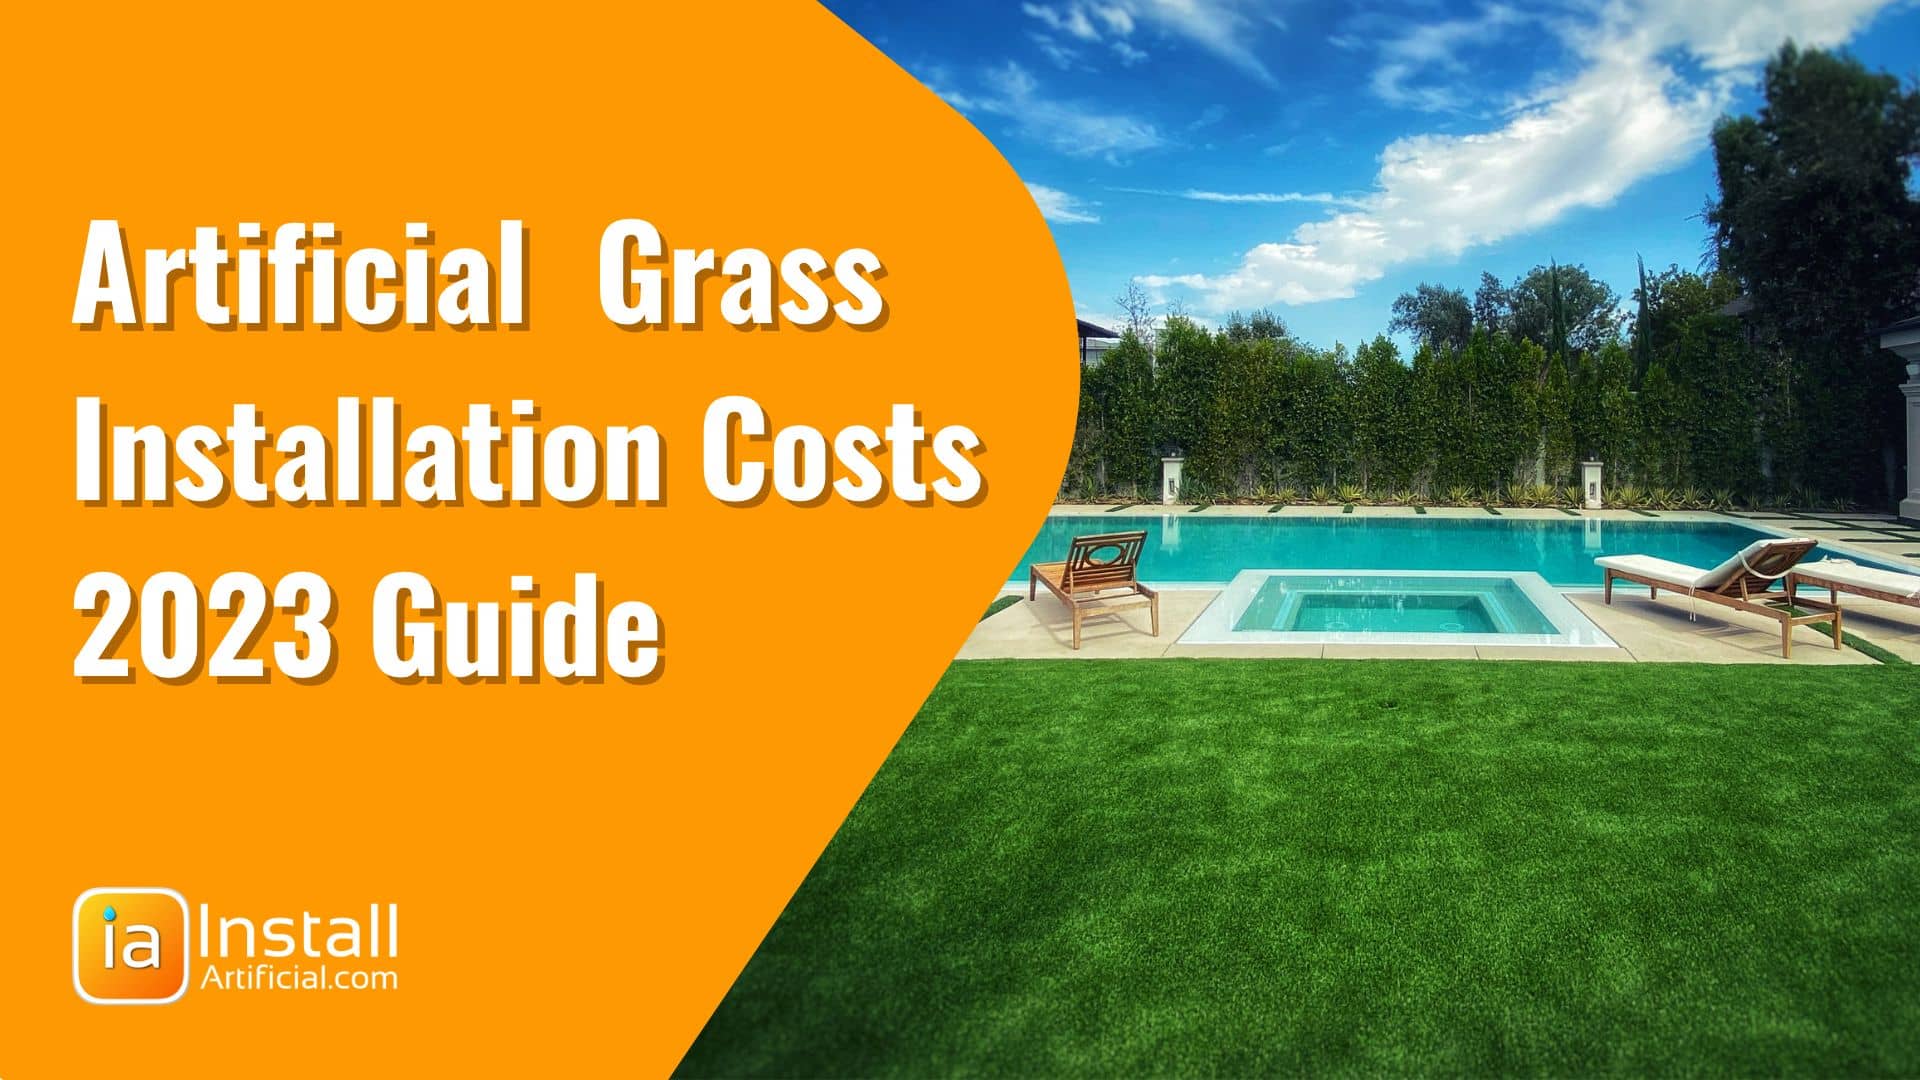 How Much Does Artificial Turf Installation Cost: 2023 Price Guide